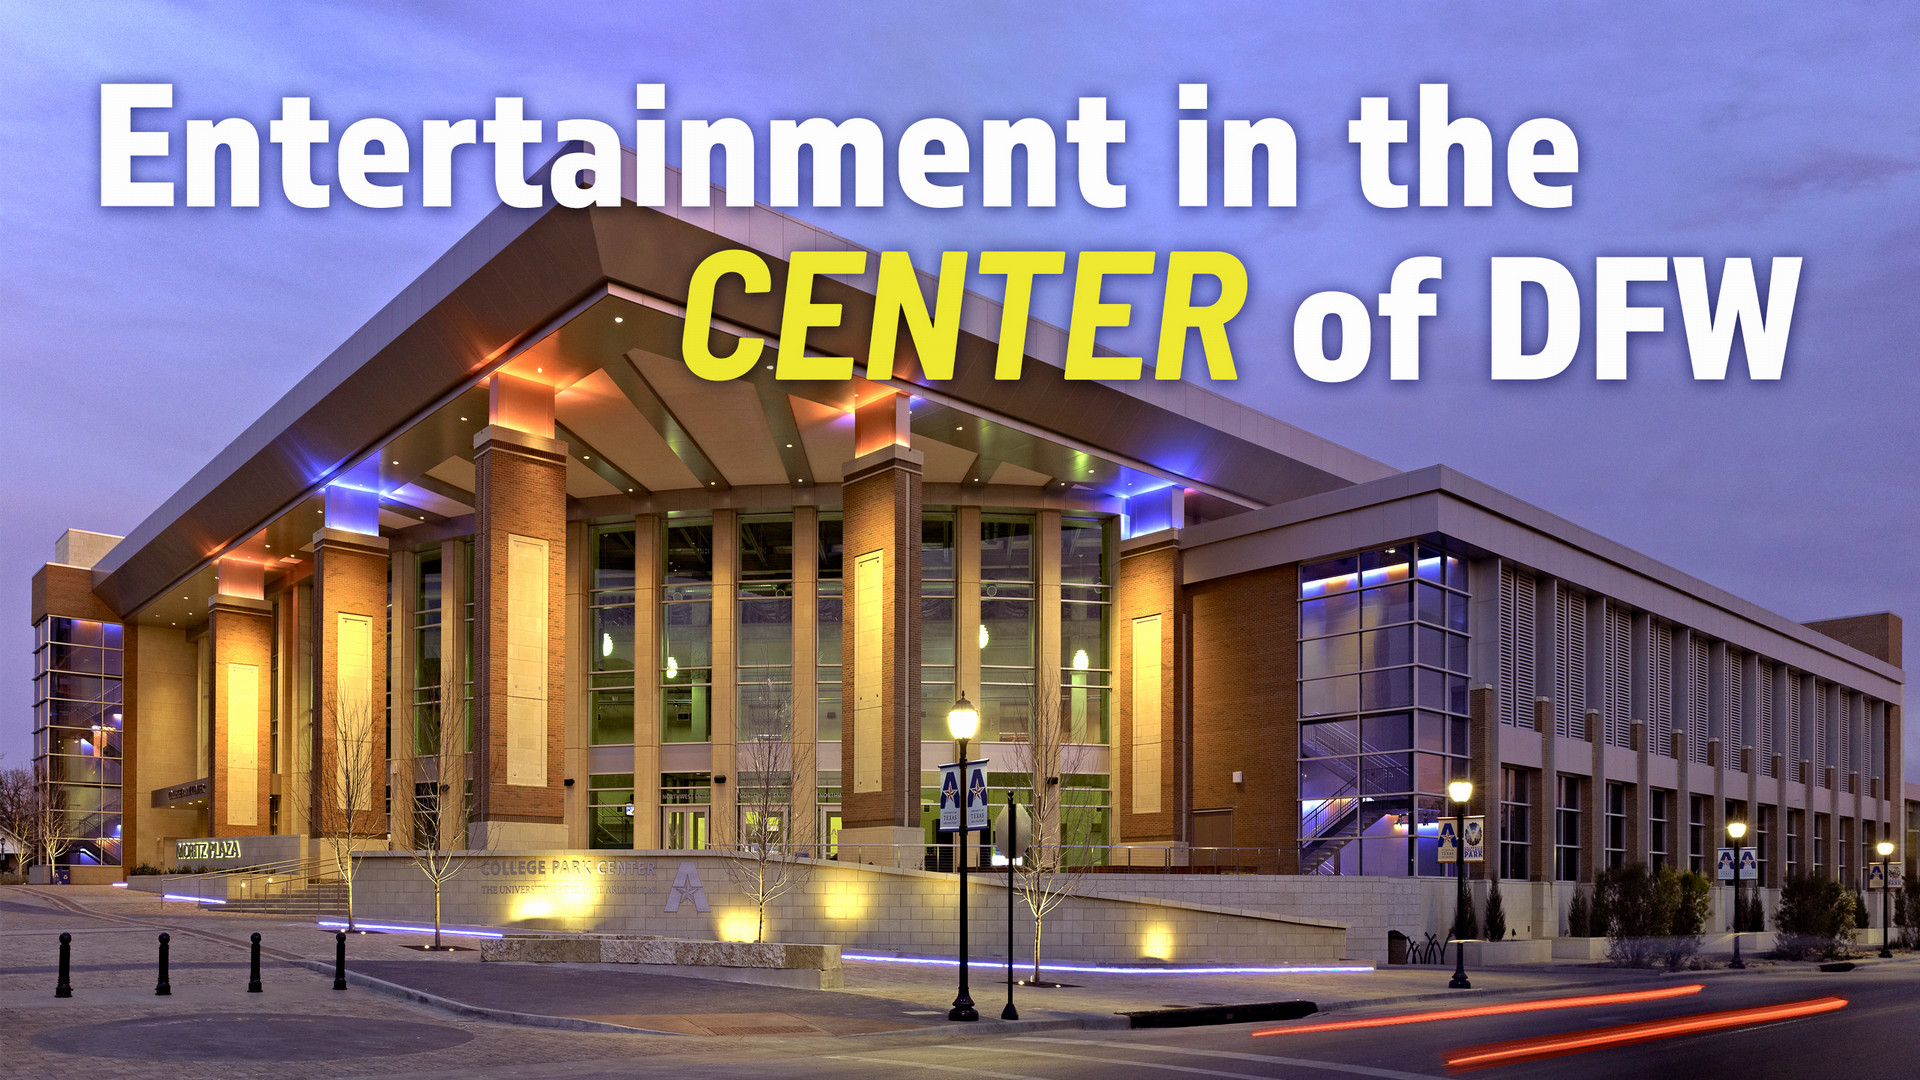 college park center. Entertainment in the CENTER of D F W 